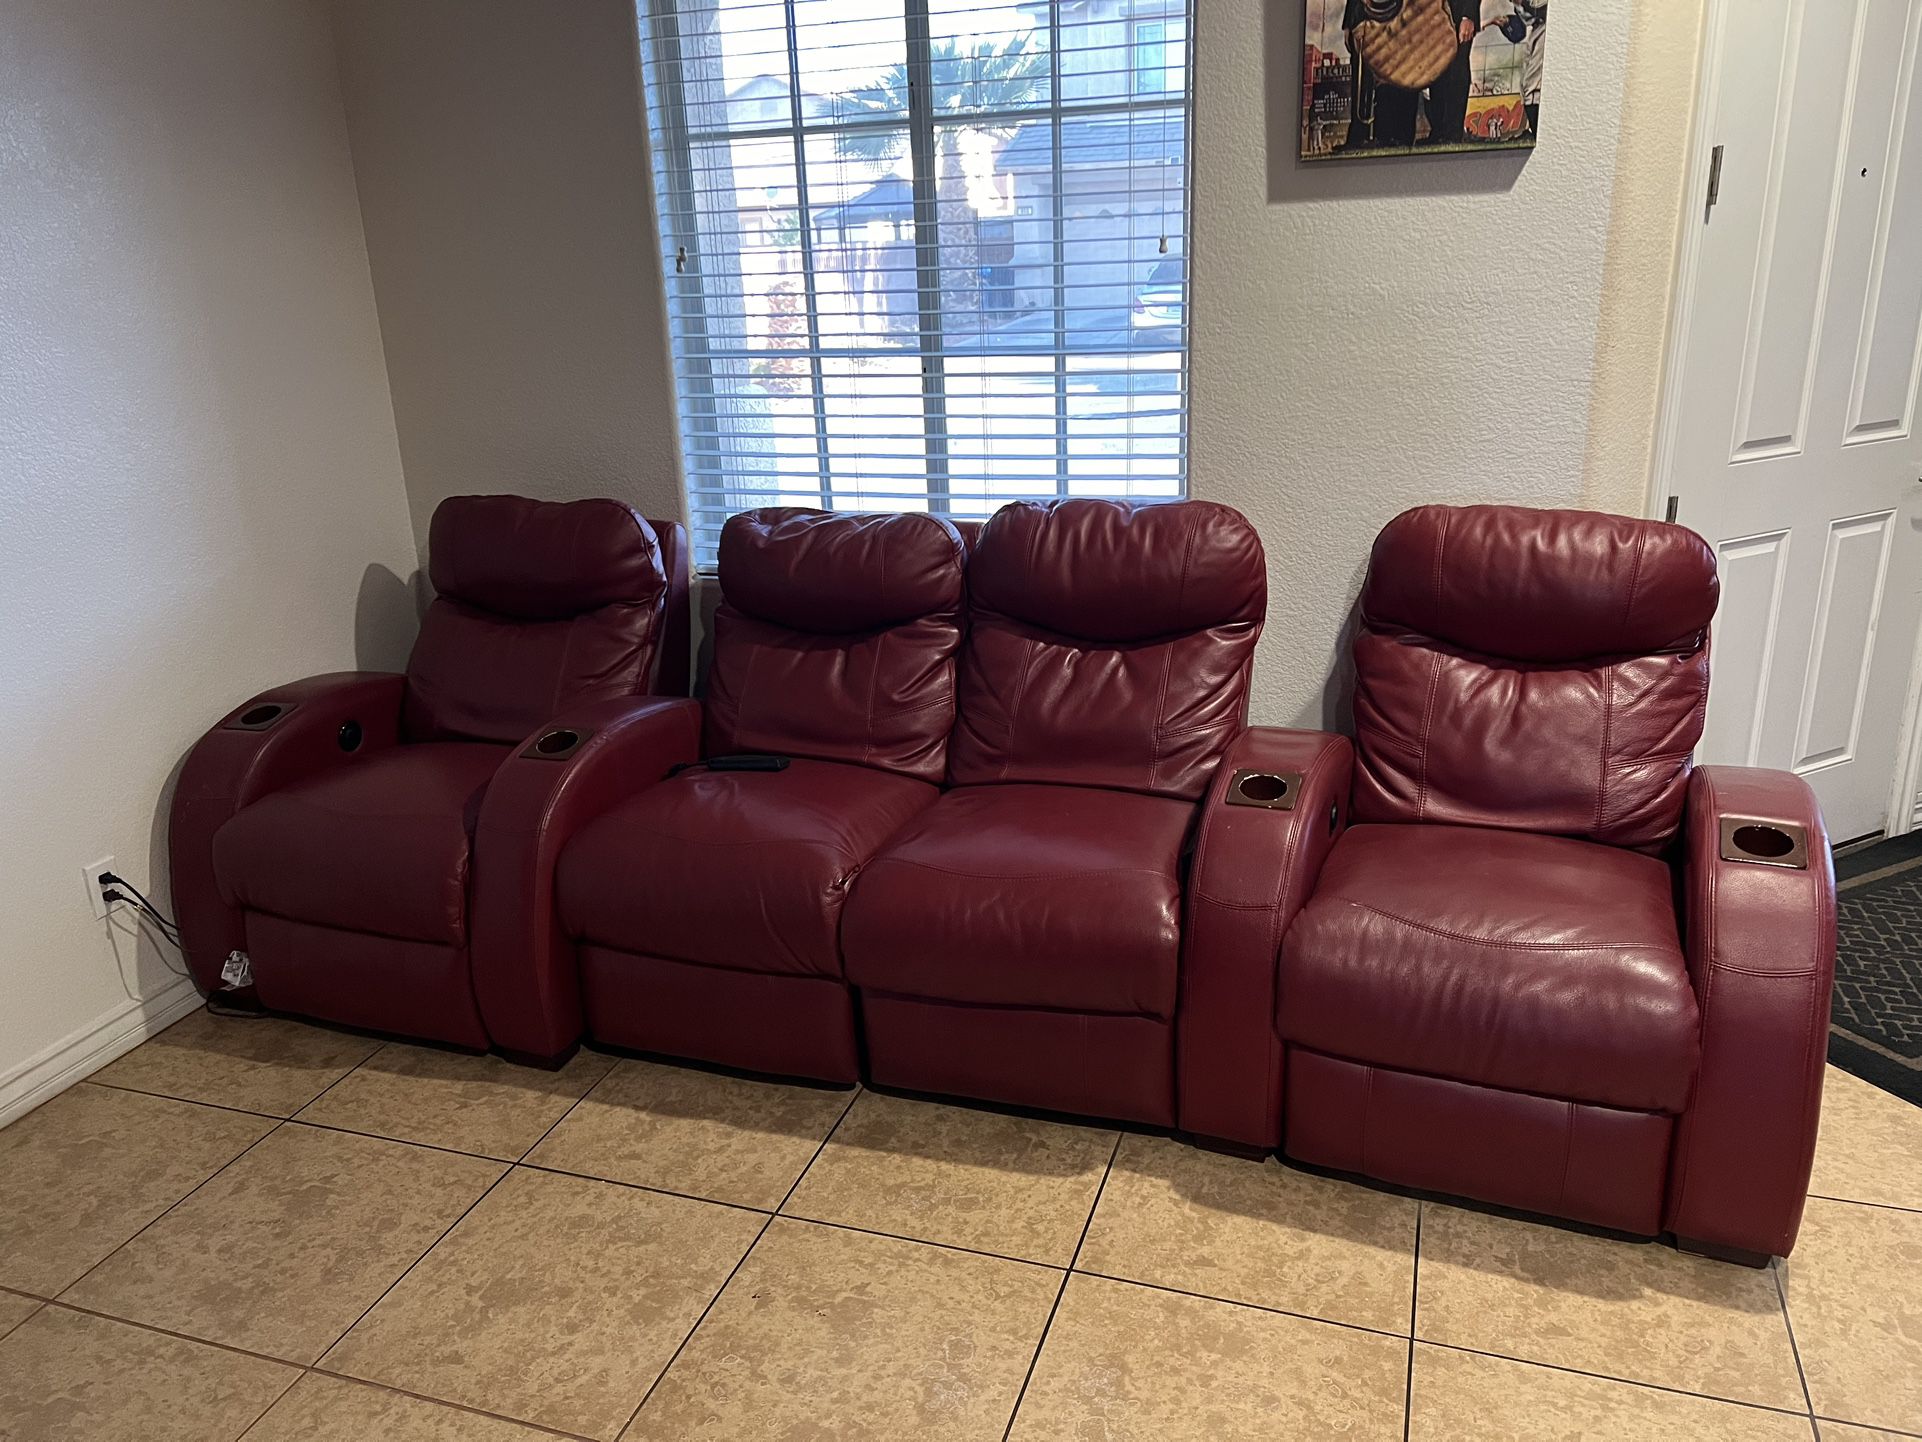 Electrical reclining sofa-all 4 Seats recline